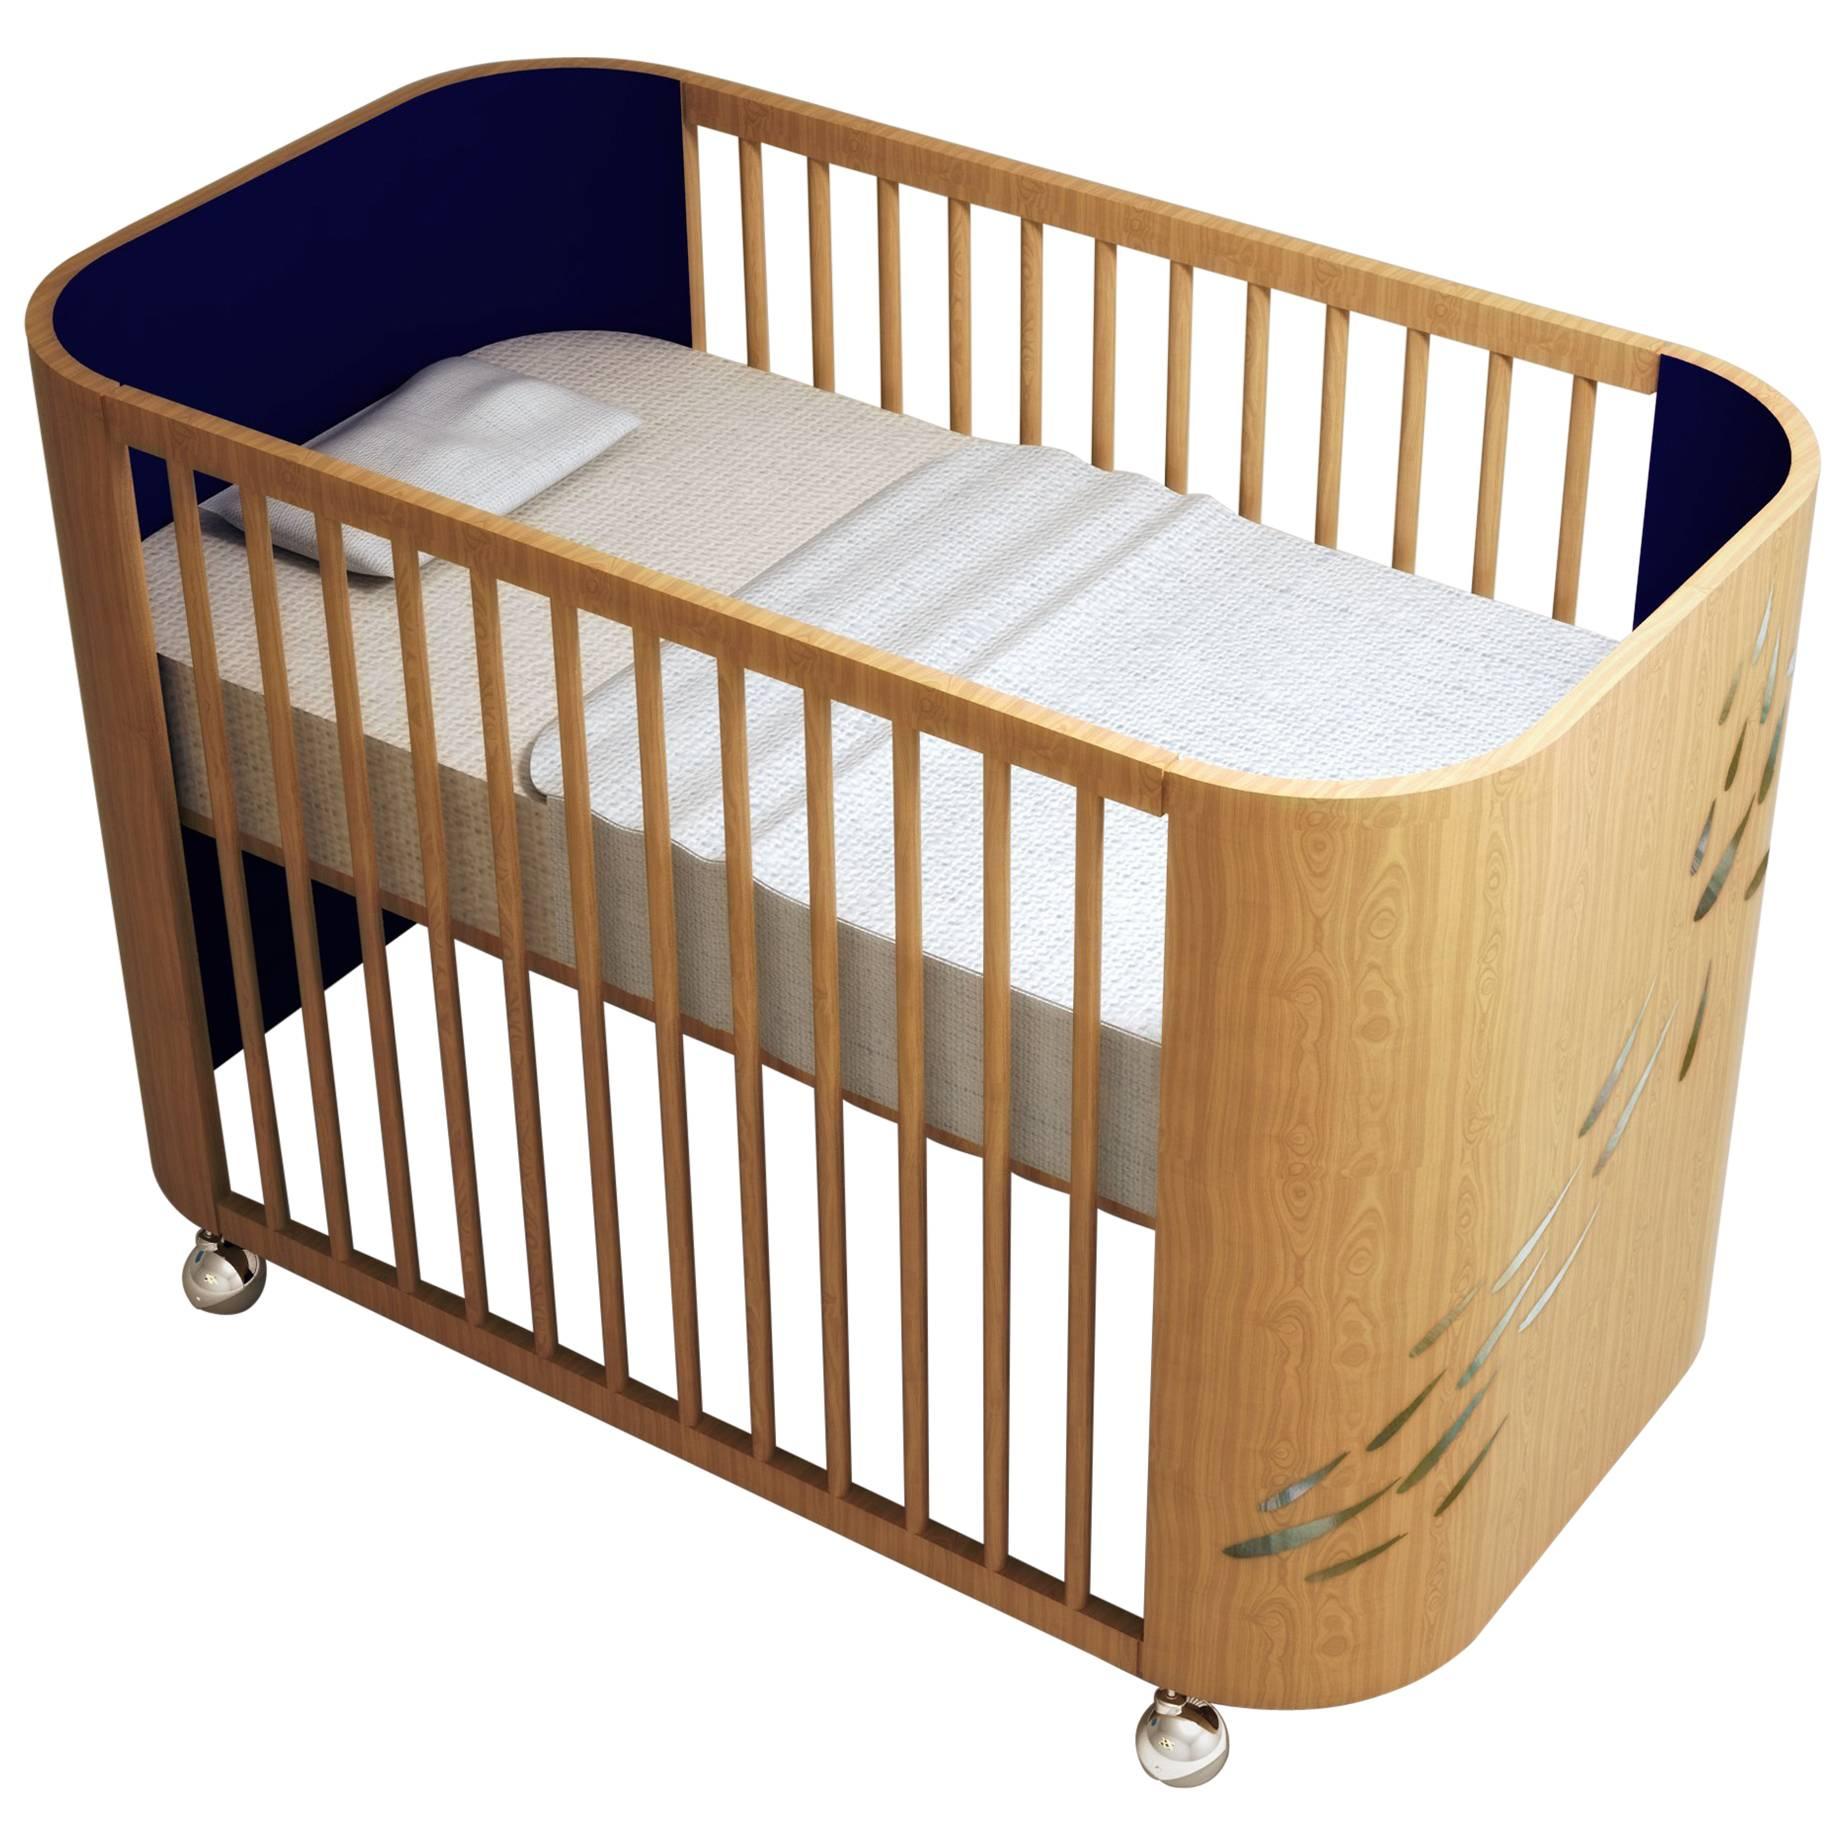 Embrace Luck Crib in Beech Wood and Navy Blue by Misk Nursery For Sale